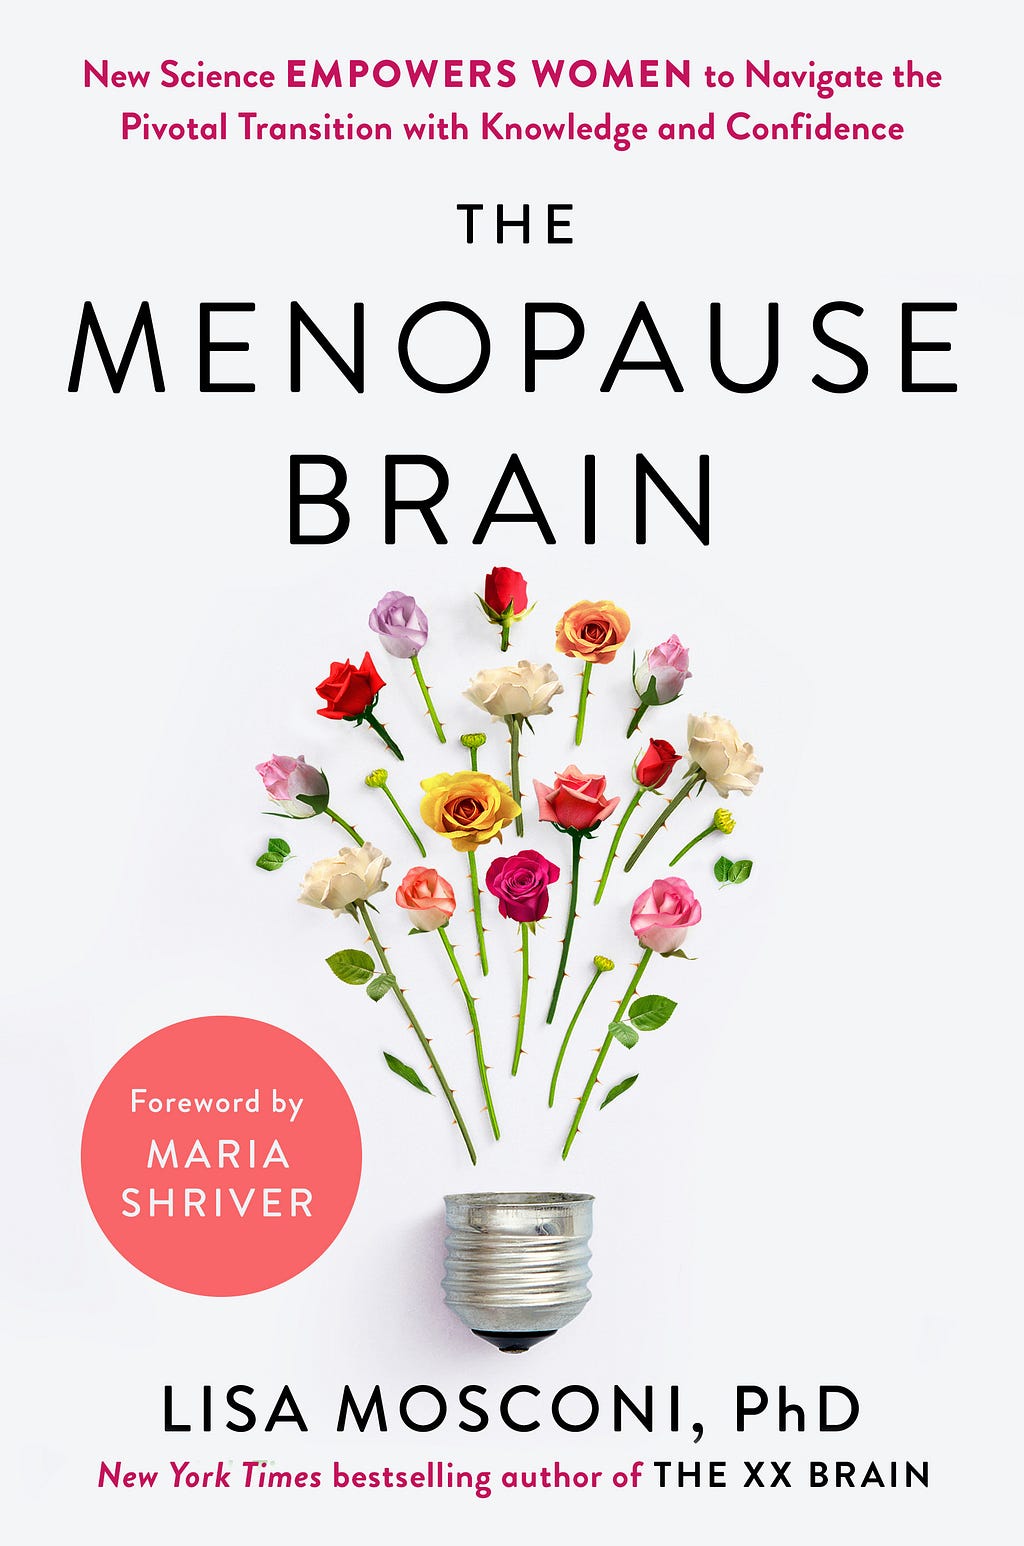 PDF The Menopause Brain: New Science Empowers Women to Navigate the Pivotal Transition with Knowledge and Confidence By Lisa Mosconi